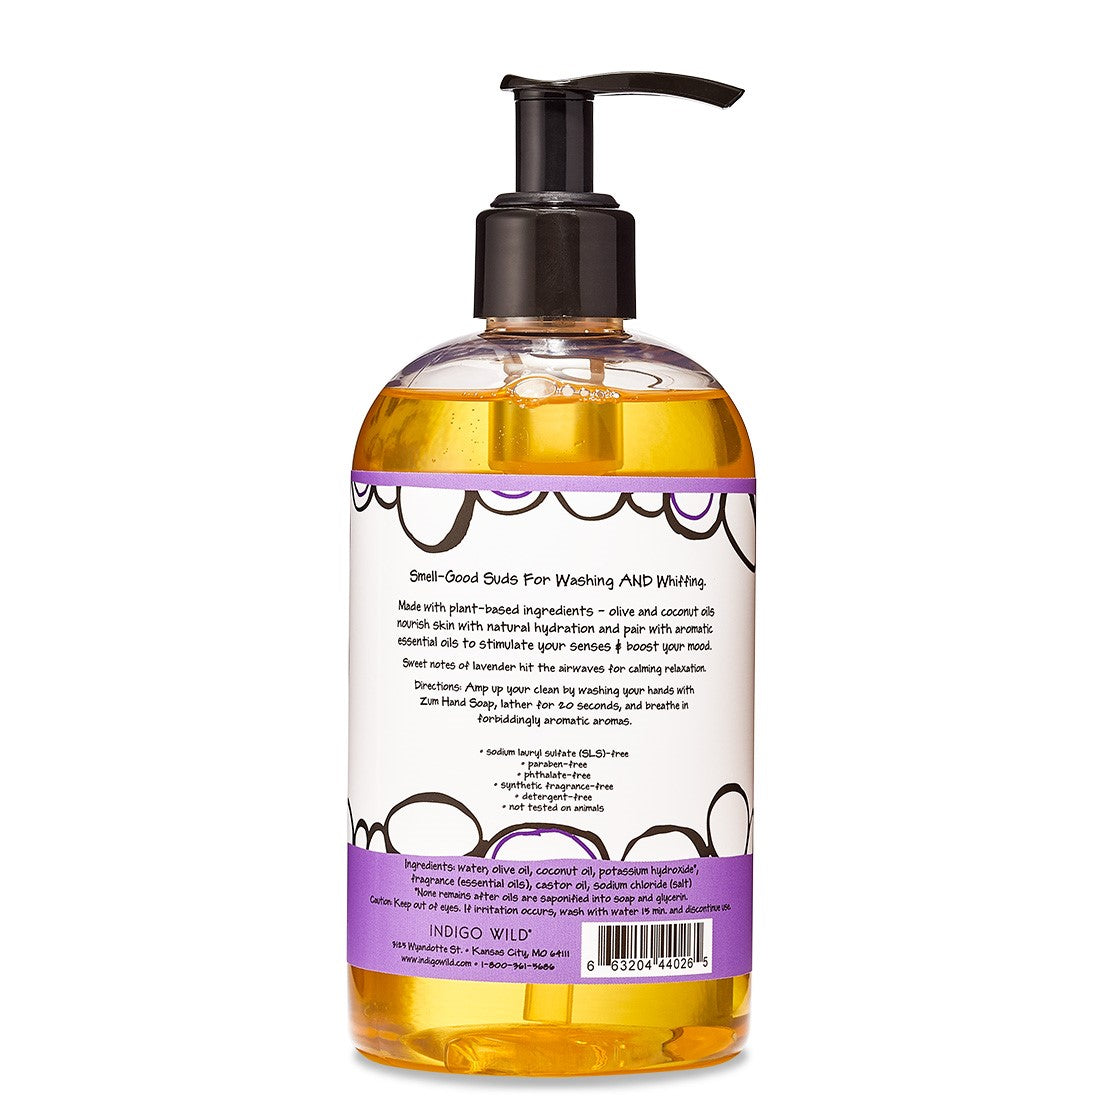 Backside of round bottle with dispensing pump top that contains lavender scented liquid hand soap.